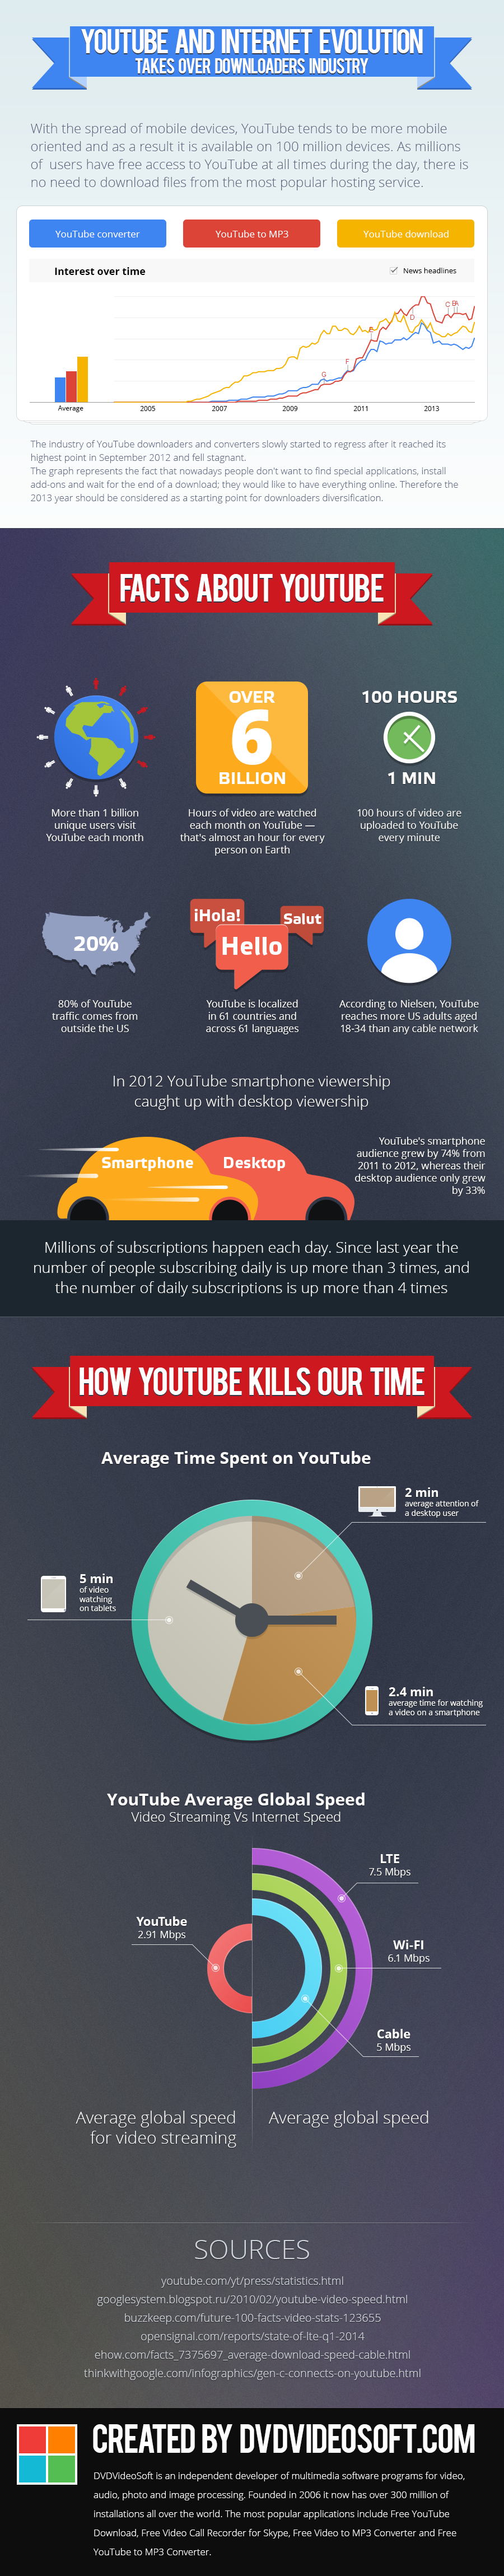 YouTube and Internet Evolution Takes Over Downloaders Industry